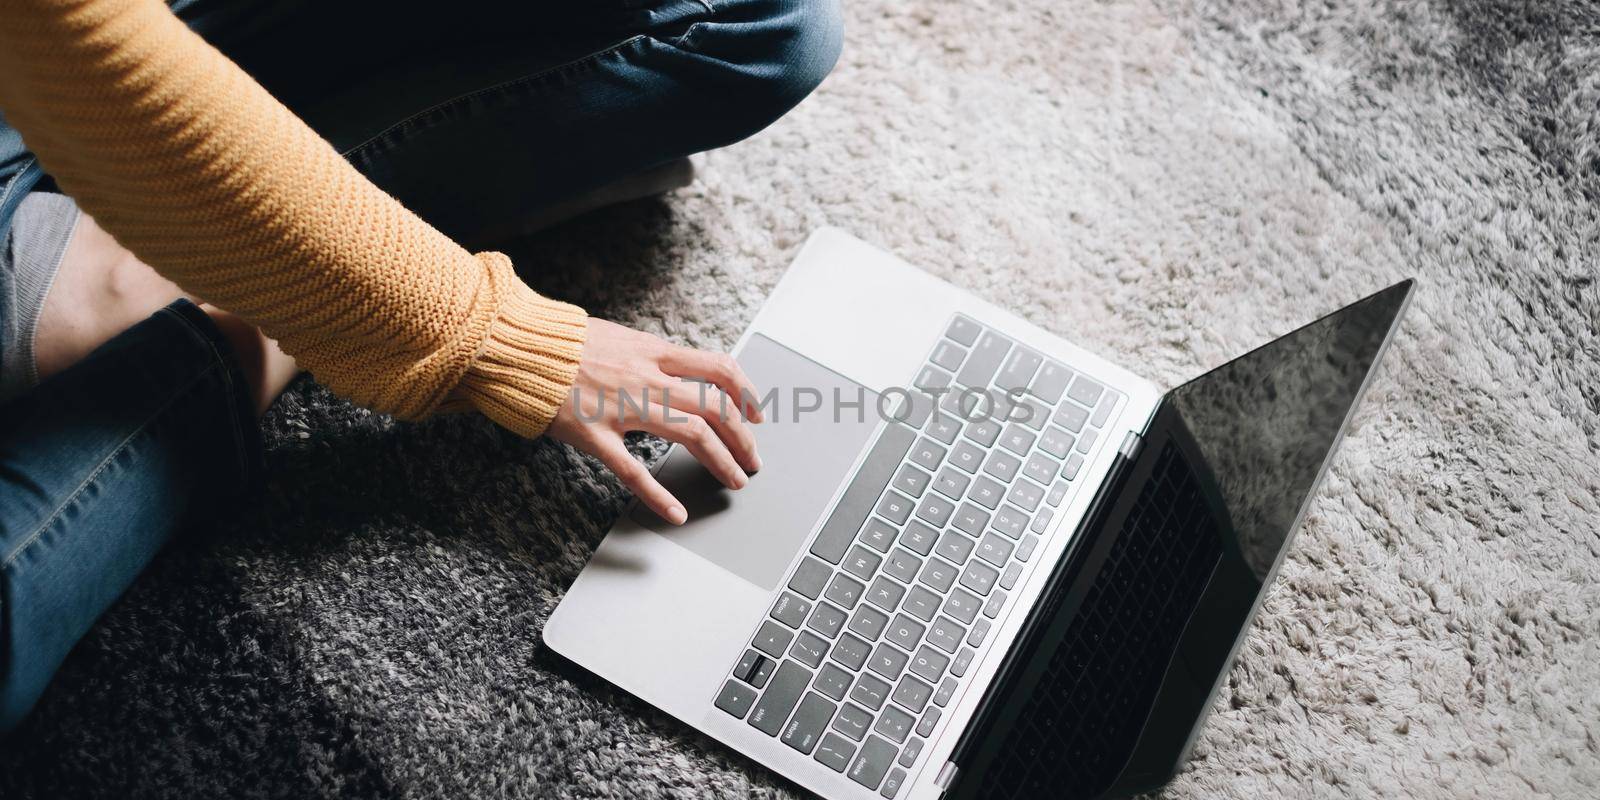 Closeup image of a business woman's hands working and typing on laptop keyboard at home